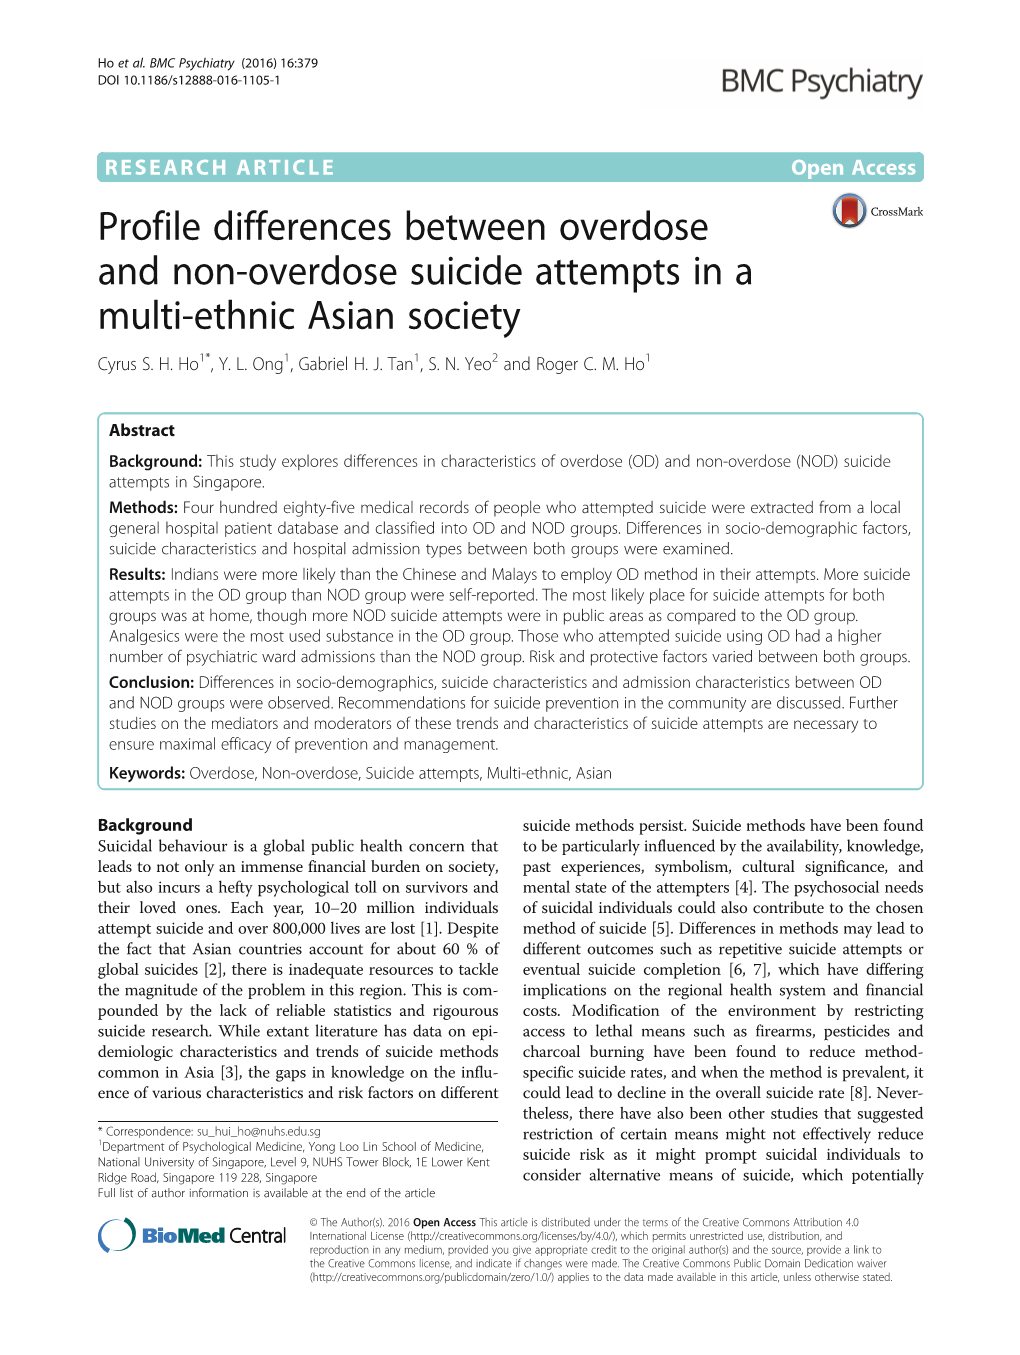 Profile Differences Between Overdose and Non-Overdose Suicide Attempts in a Multi-Ethnic Asian Society Cyrus S